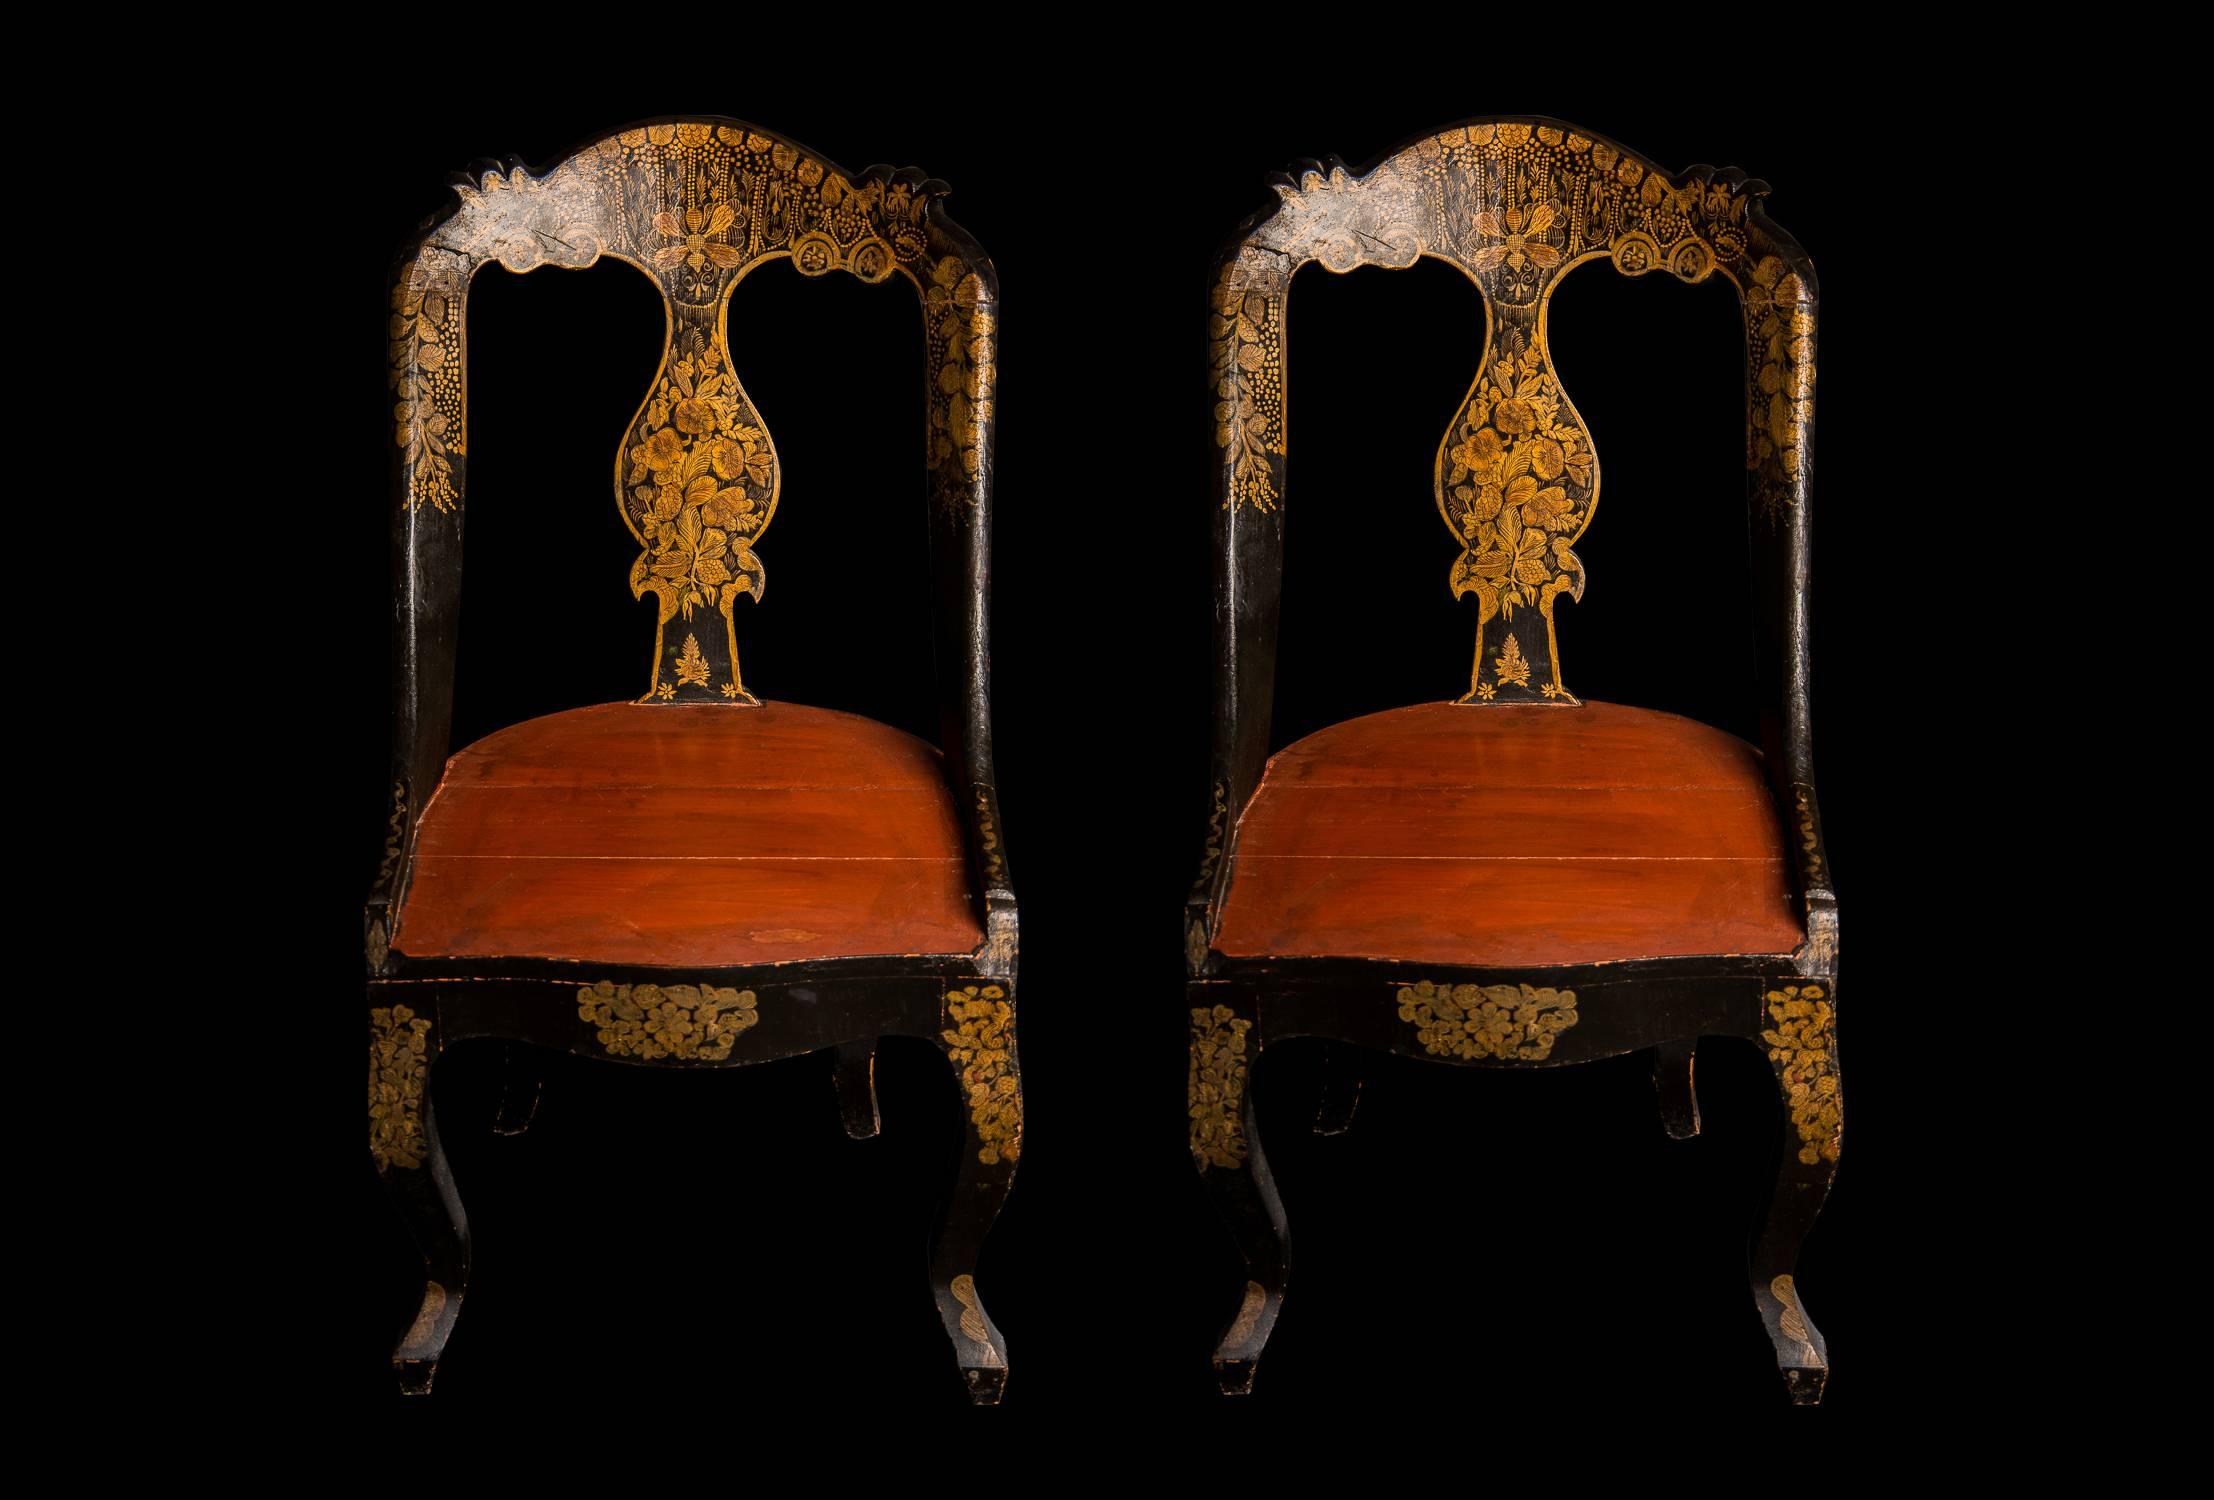 A real find, effortlessly stylish and decorative, wonderful silhouette and complimentary lines that work in any contemporary setting. This sophisticated pair of matching chairs combine both European taste and Indian decorative craftsmanship